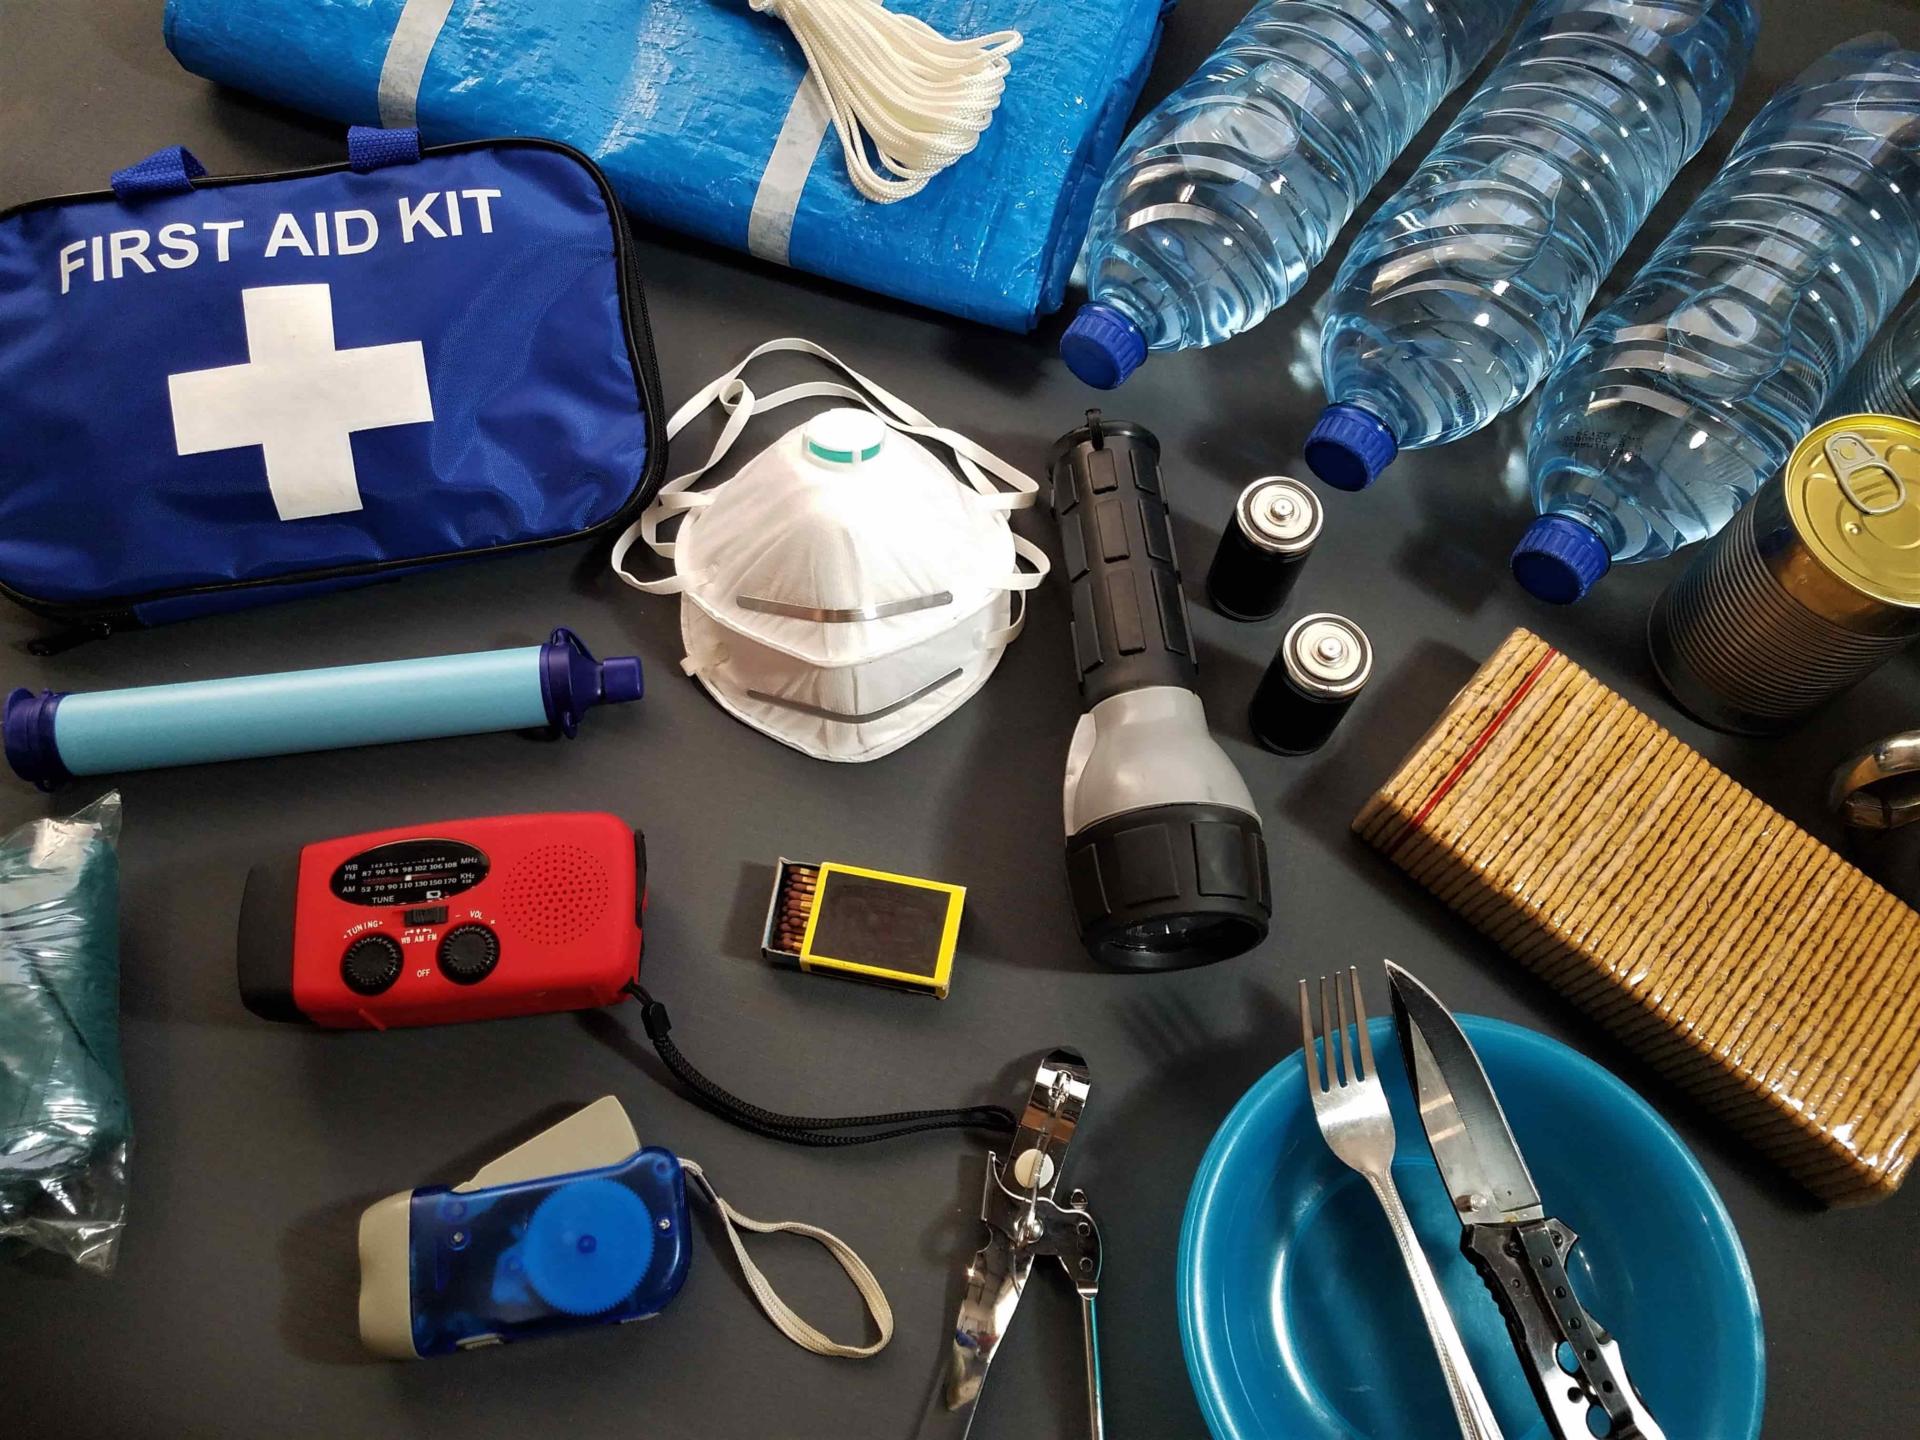 emergency supplies and first aid kit